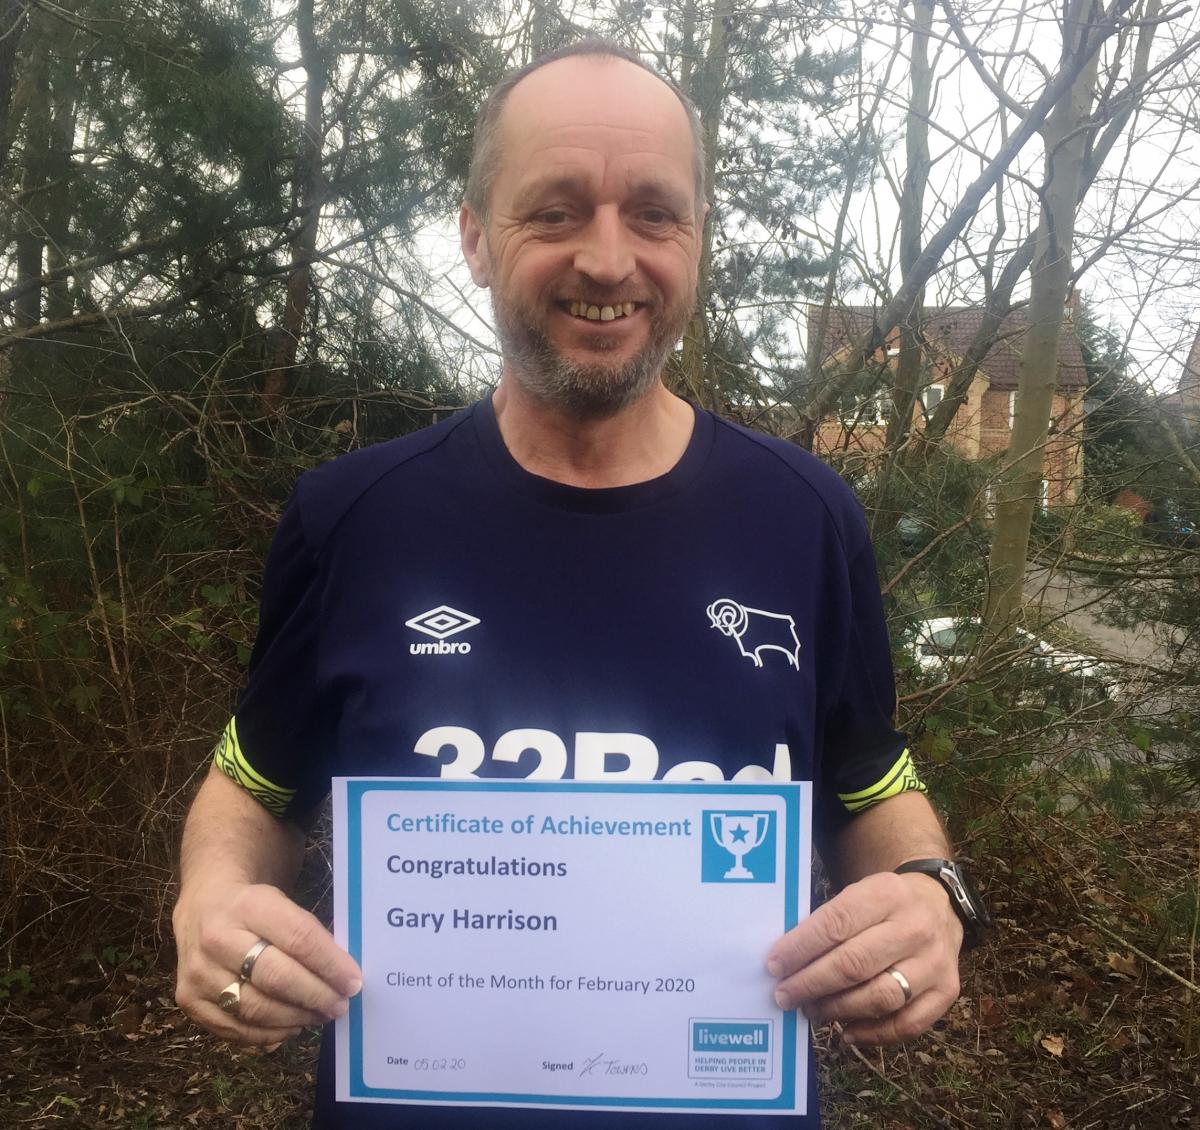 Livewell client of the month for Feb 20 - Gary Harrison